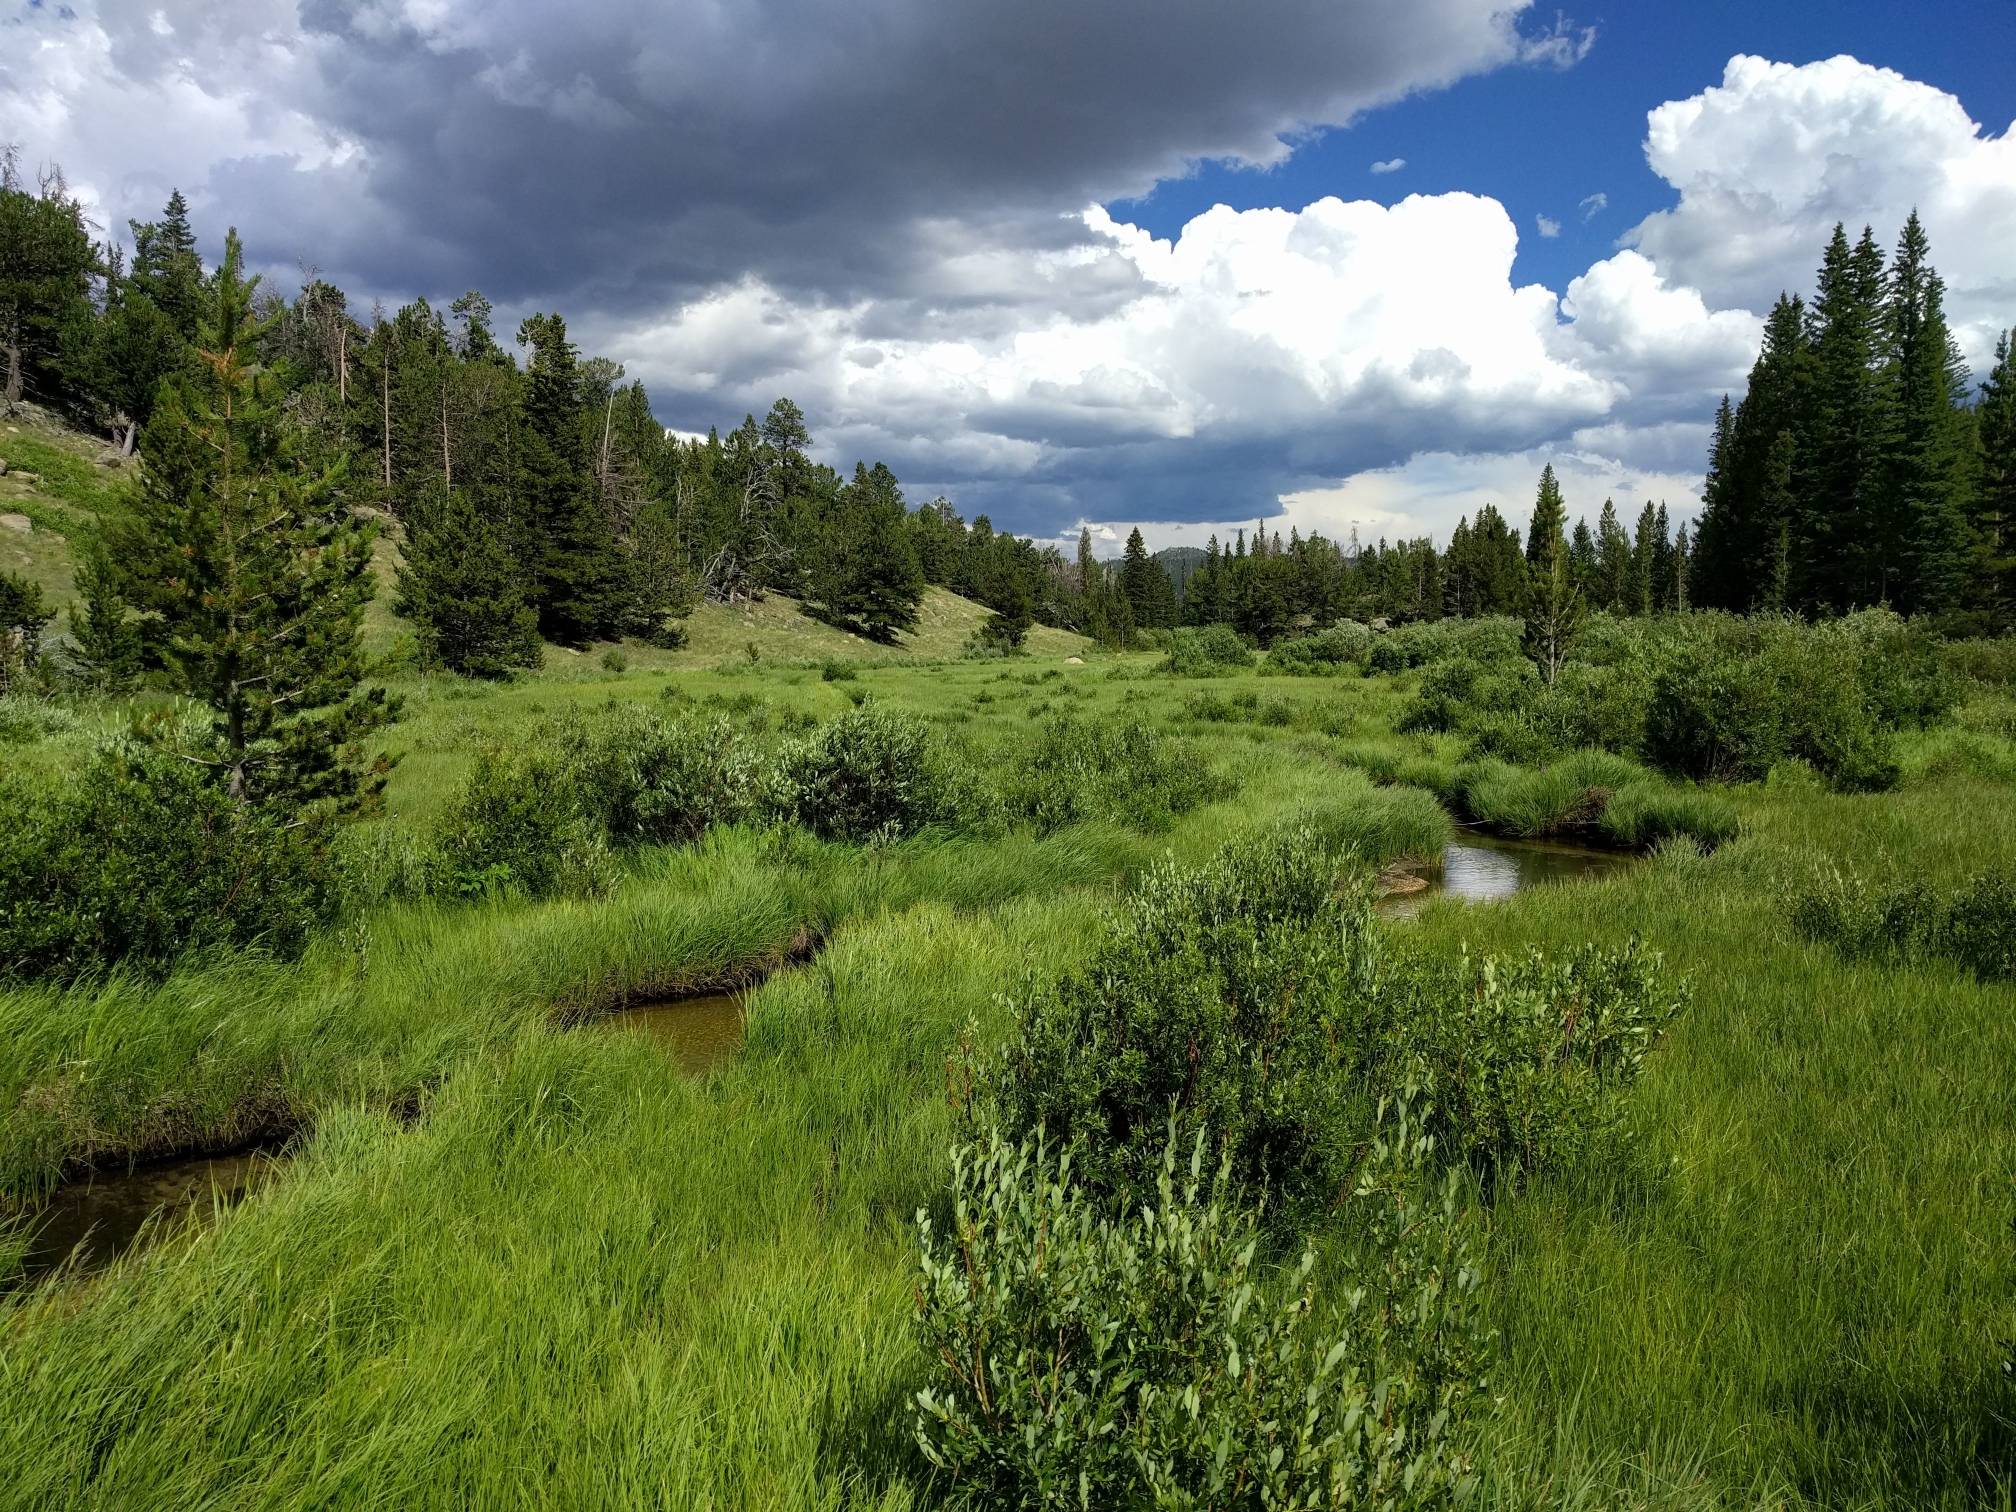 Image: The Hidden Valley Creek as seen from the Beaver Ponds